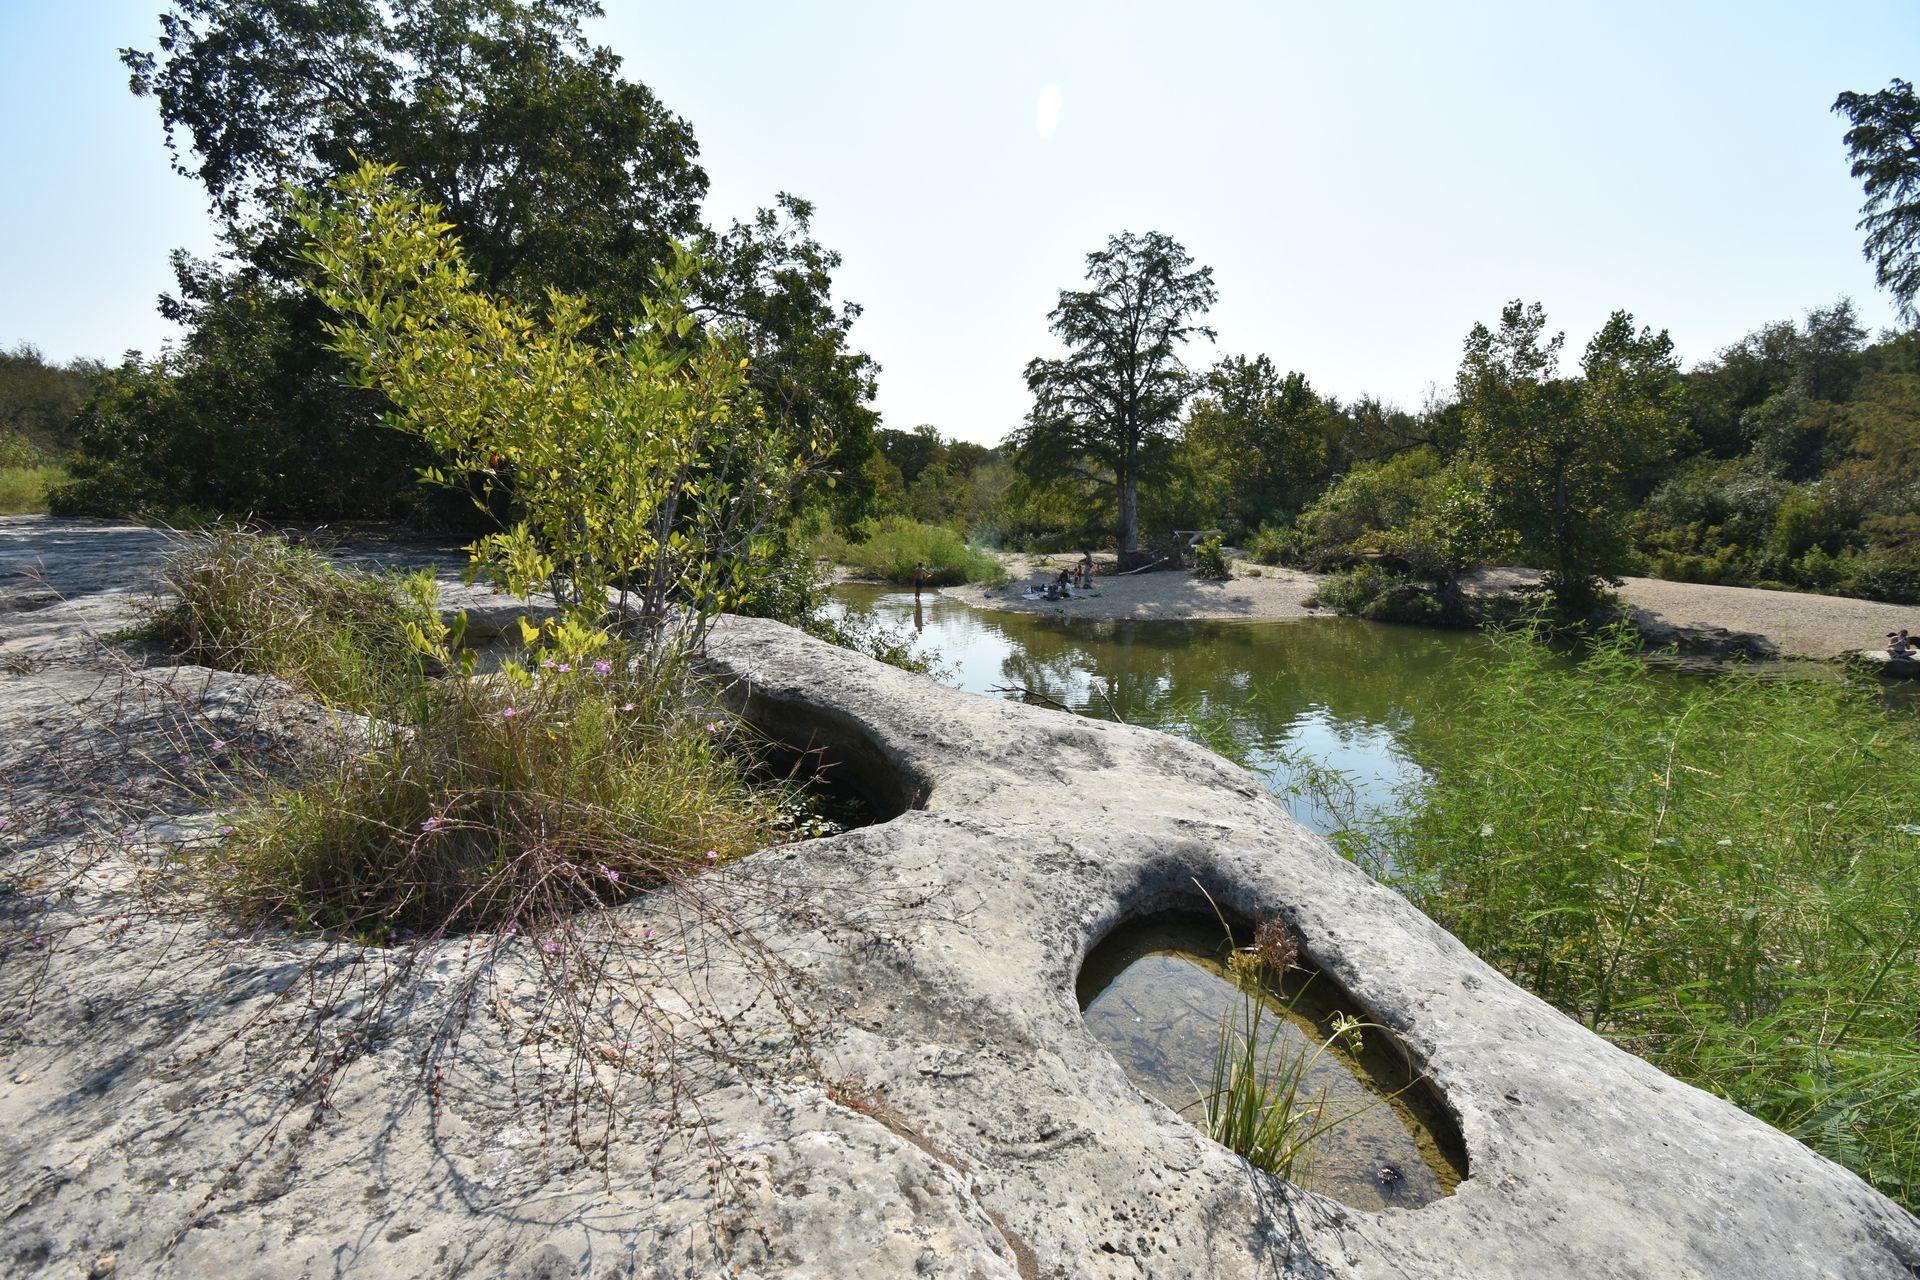 A rock with some large holes, with a plant growing out of one, and water nearby at McKinney Falls